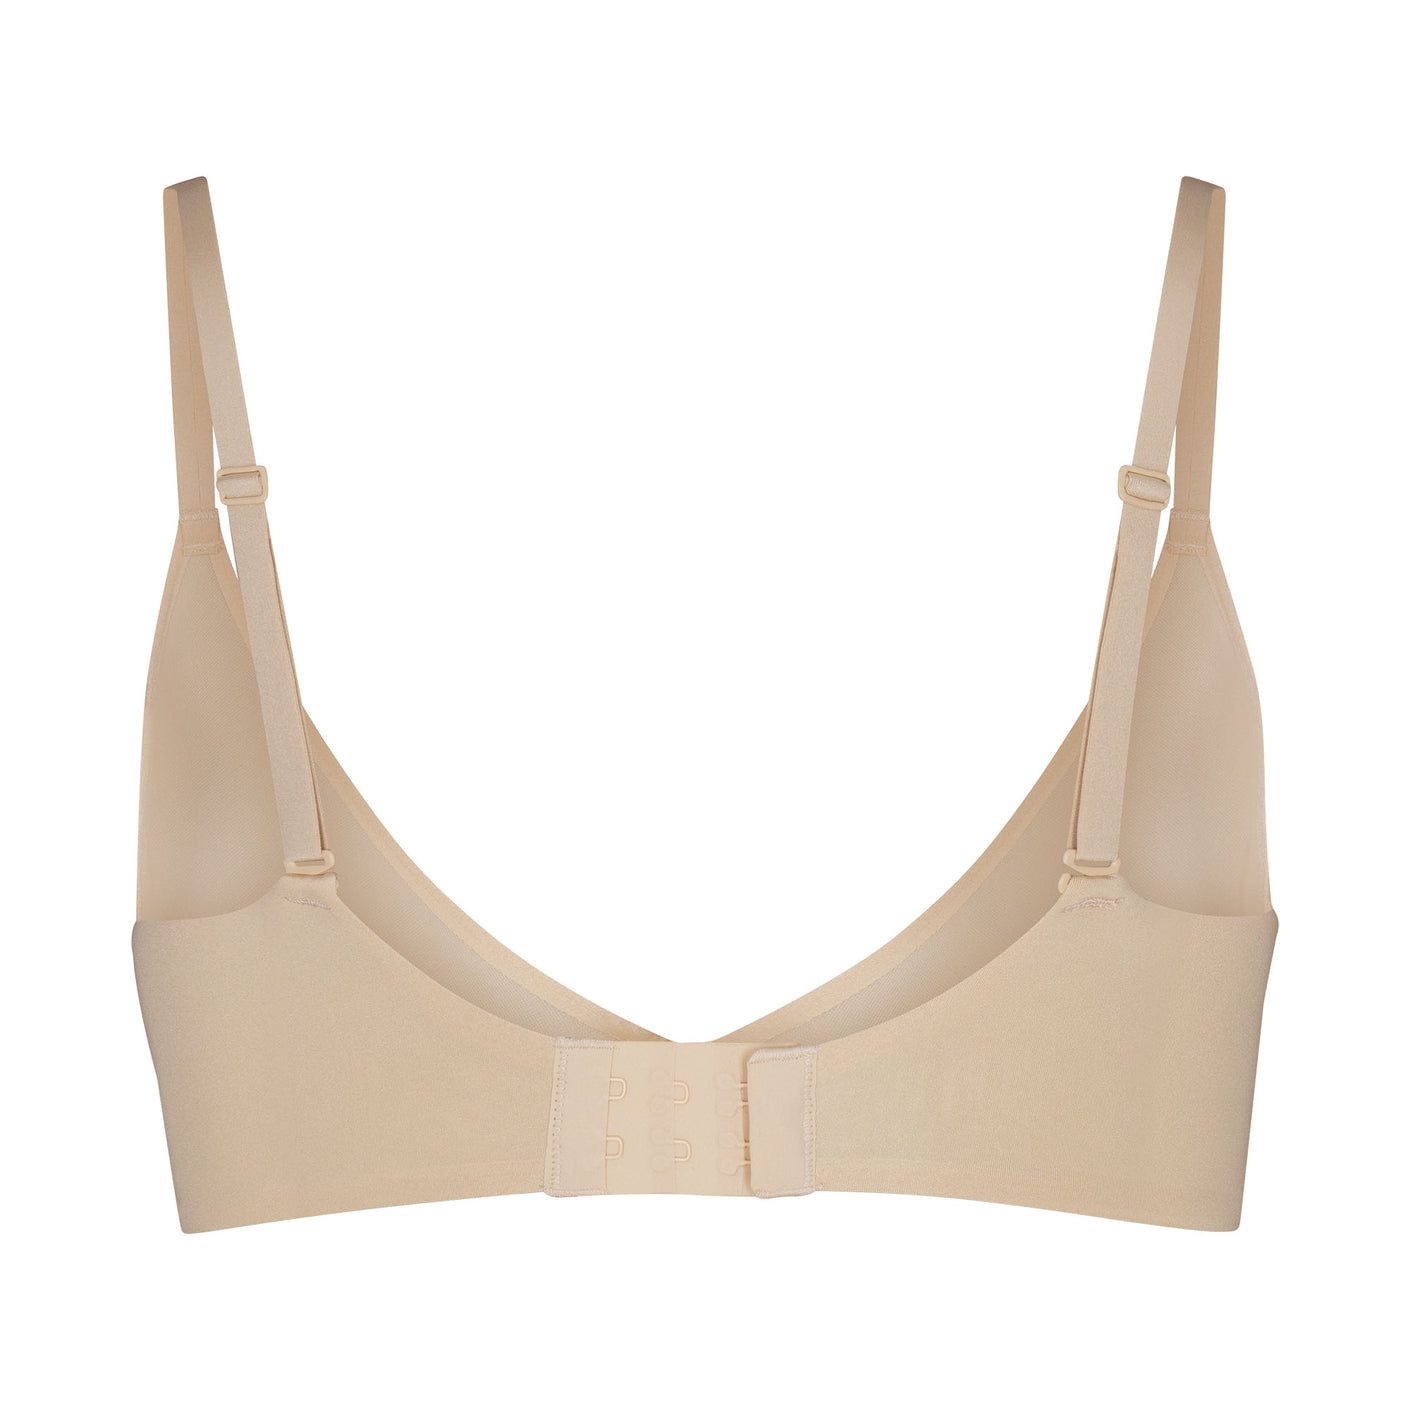 Track Fits Everybody Lace Unlined Scoop Bra - Sand - 38 - B at Skims